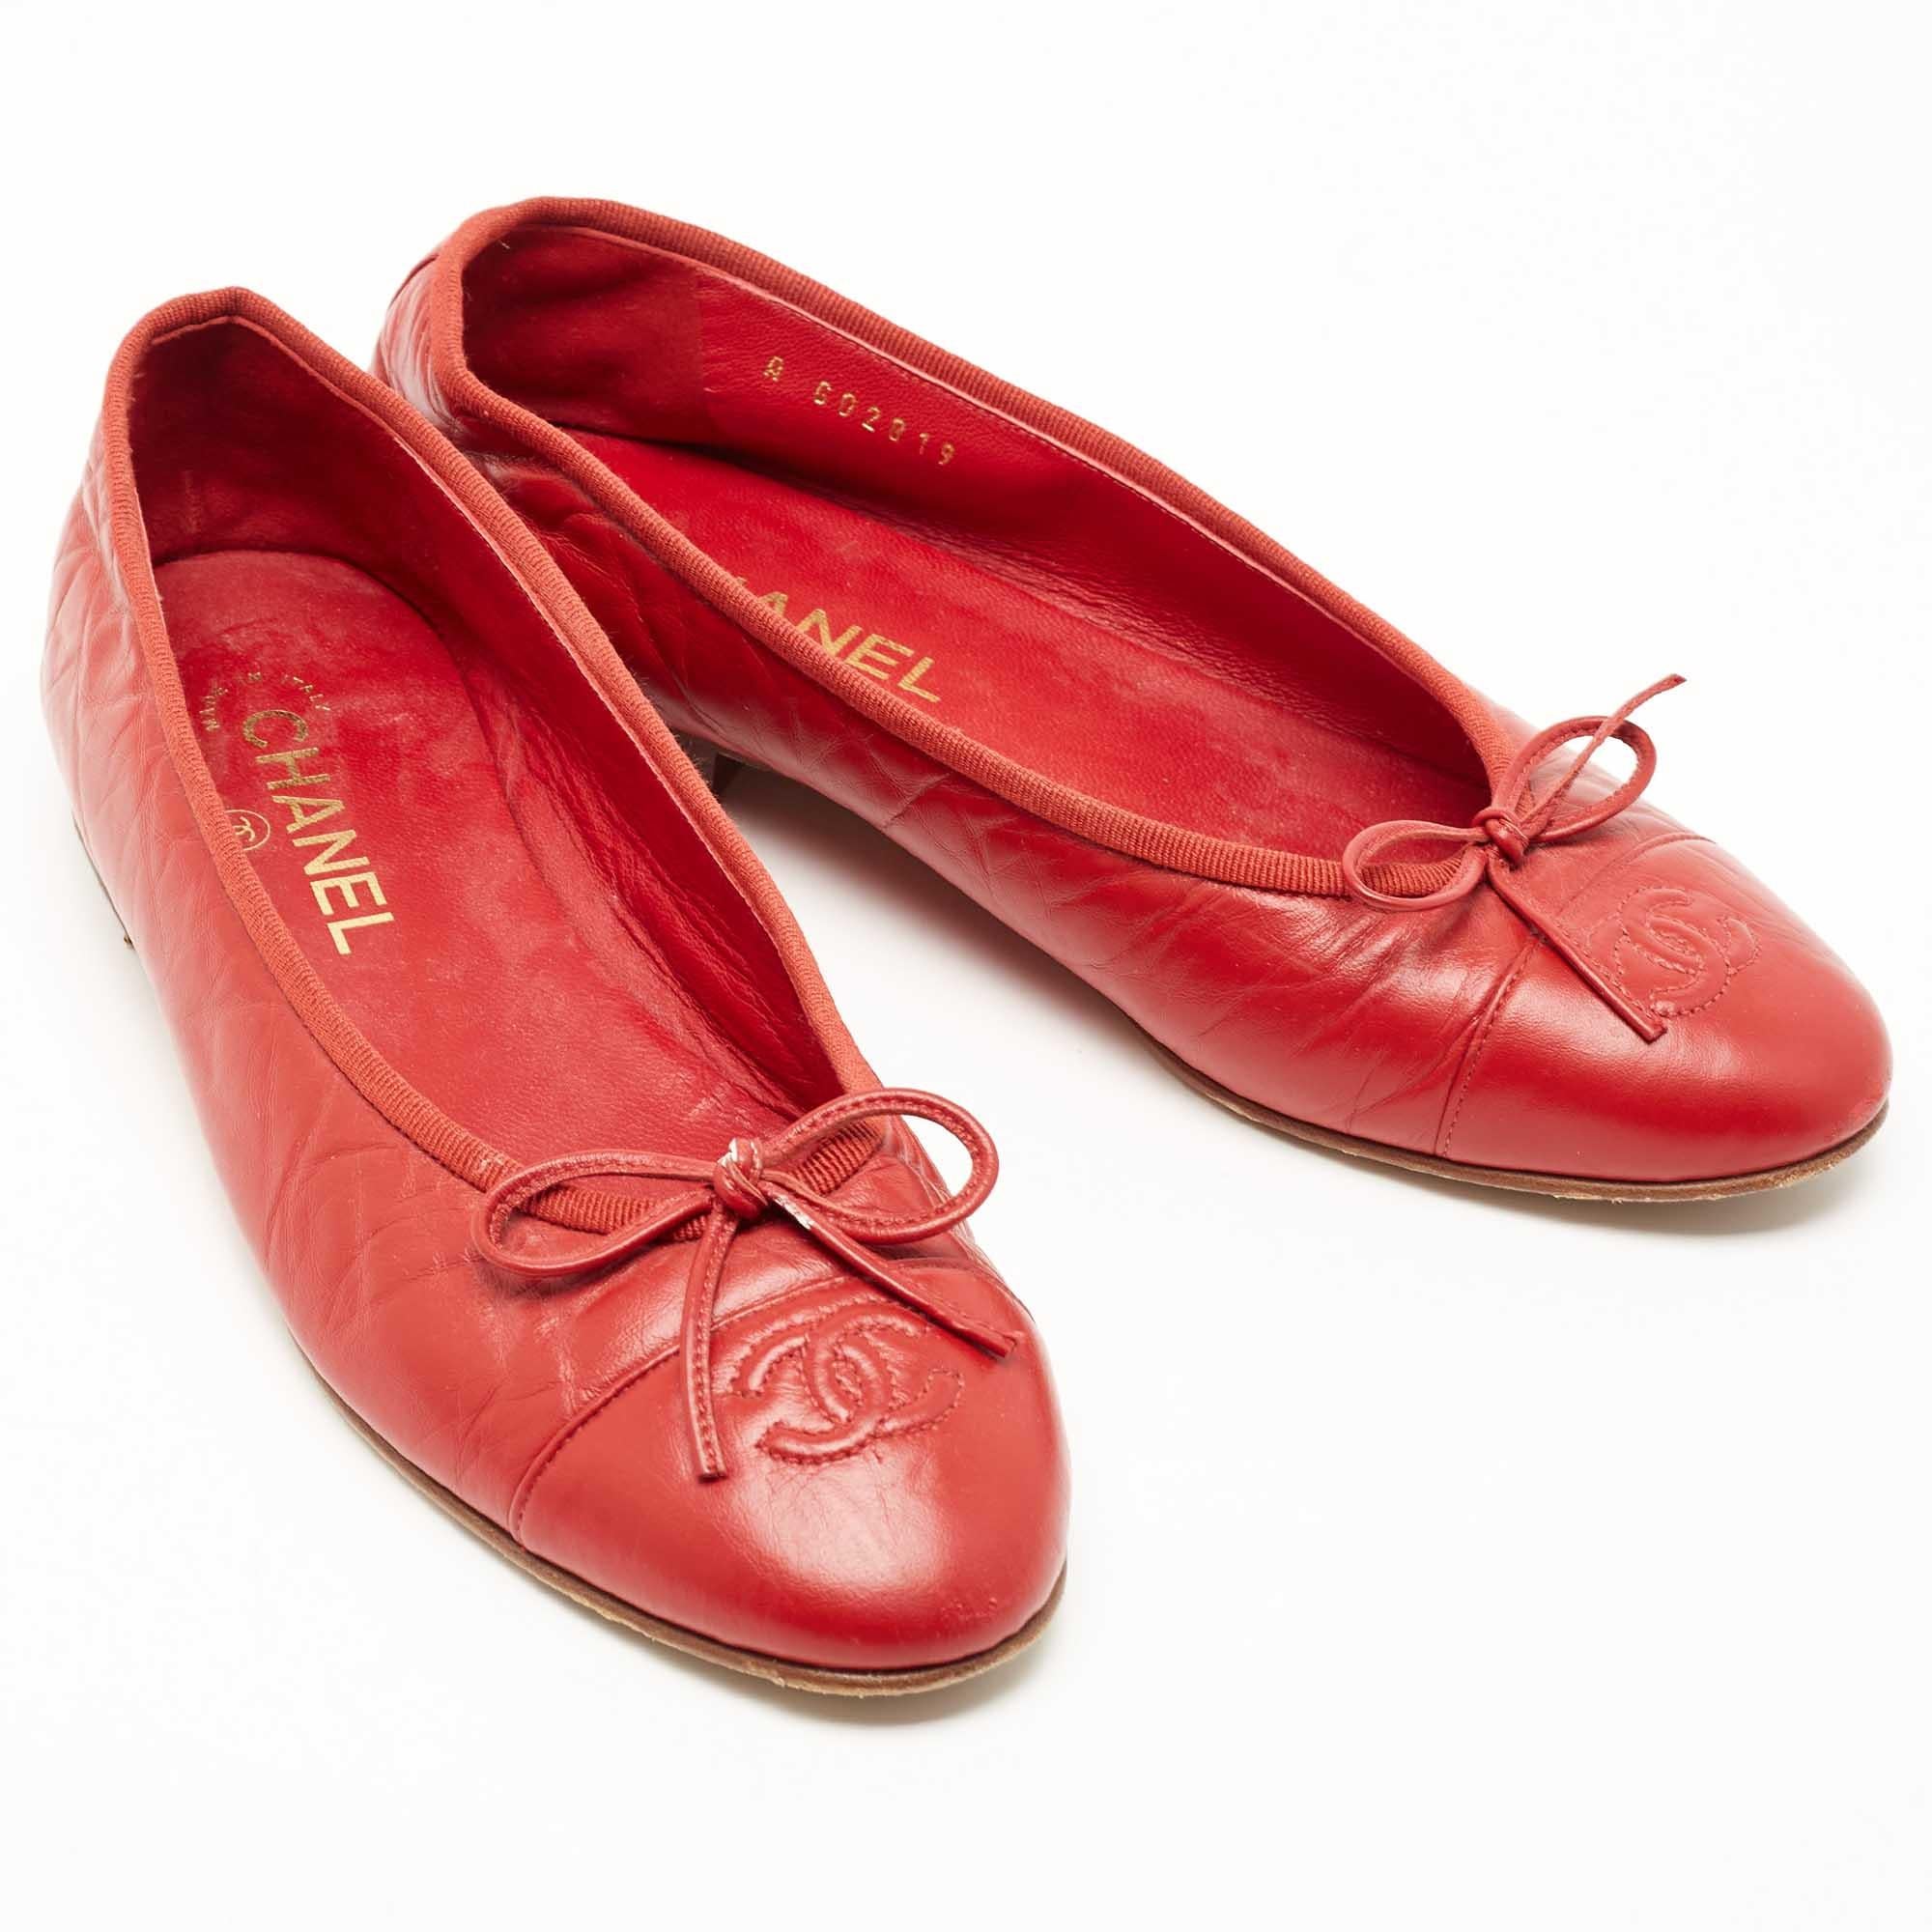 Chanel Red Leather CC Bow Ballet Flats Size 38.5 In Good Condition For Sale In Dubai, Al Qouz 2